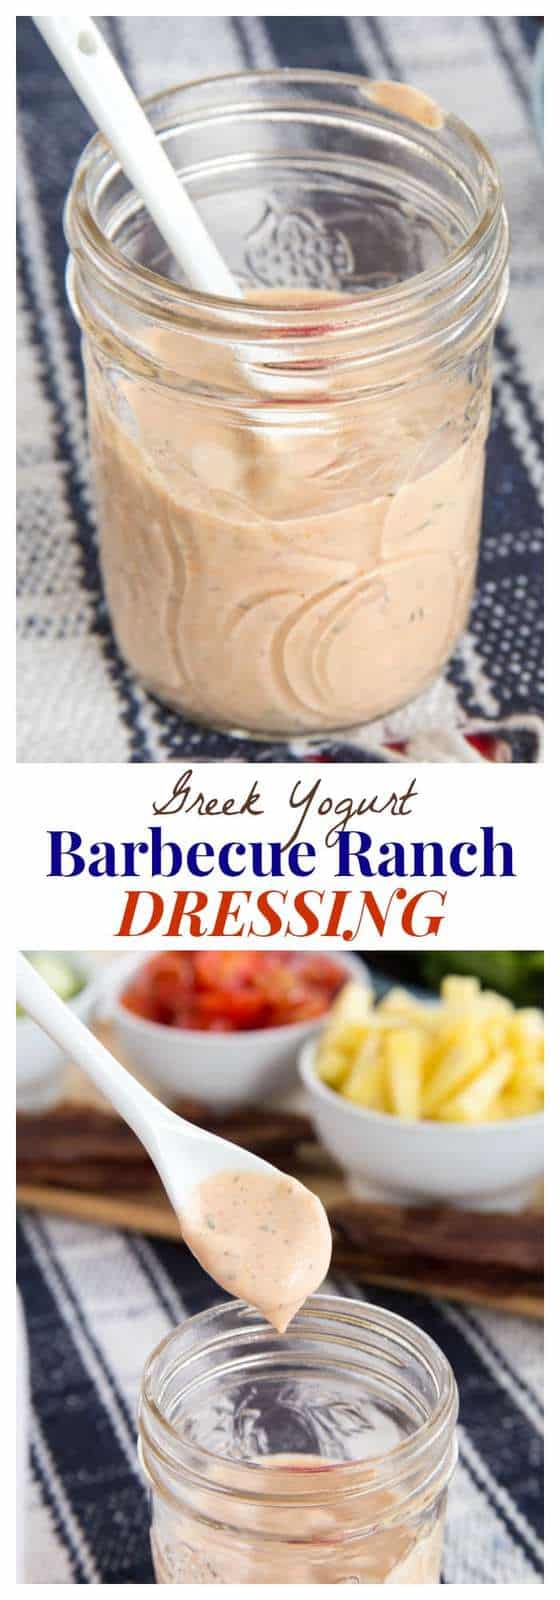 Greek Yogurt Barbecue Ranch Dressing - you just need basic ingredients to put a healthy and tangy twist on the classic Ranch salad dressing recipe for dipping veggies or drizzling over salads. | cupcakesandkalechips.com | gluten free, low carb recipe